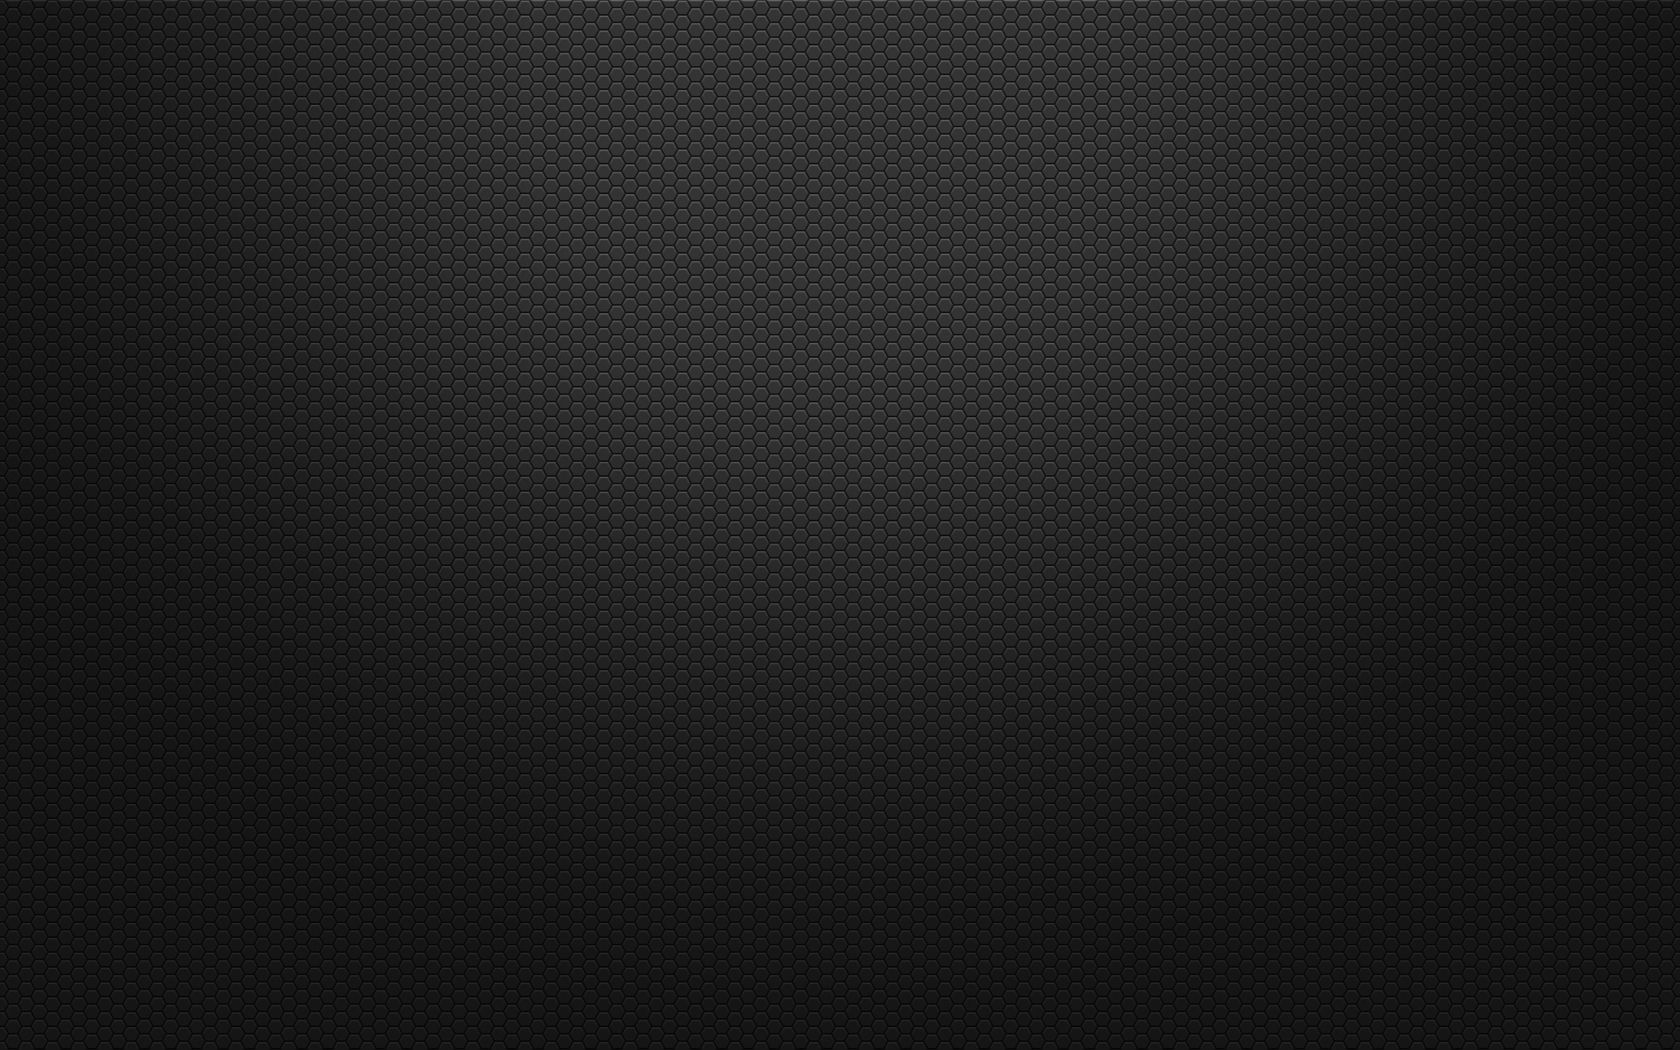 Plain Black Hd Wallpapers The Art Mad Backgrounds